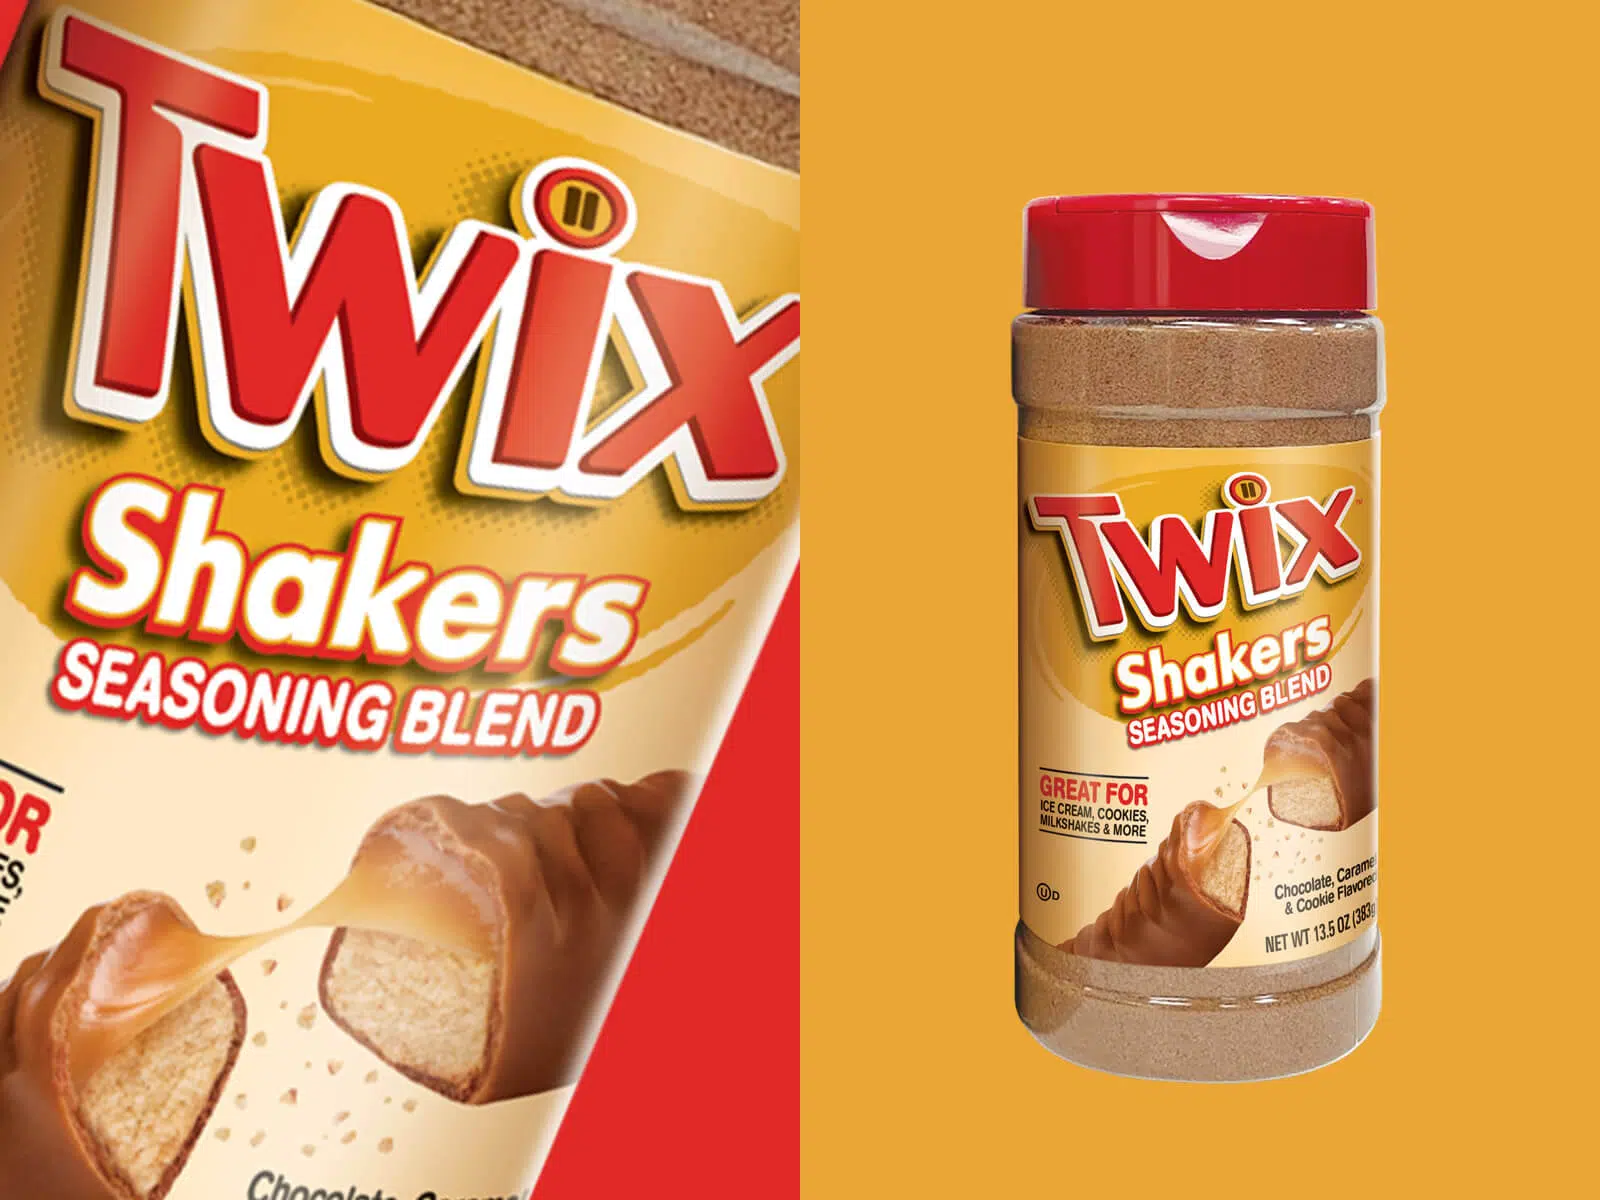 Twix Launches Seasoning to Sprinkle its Chocolate Bar Flavors on